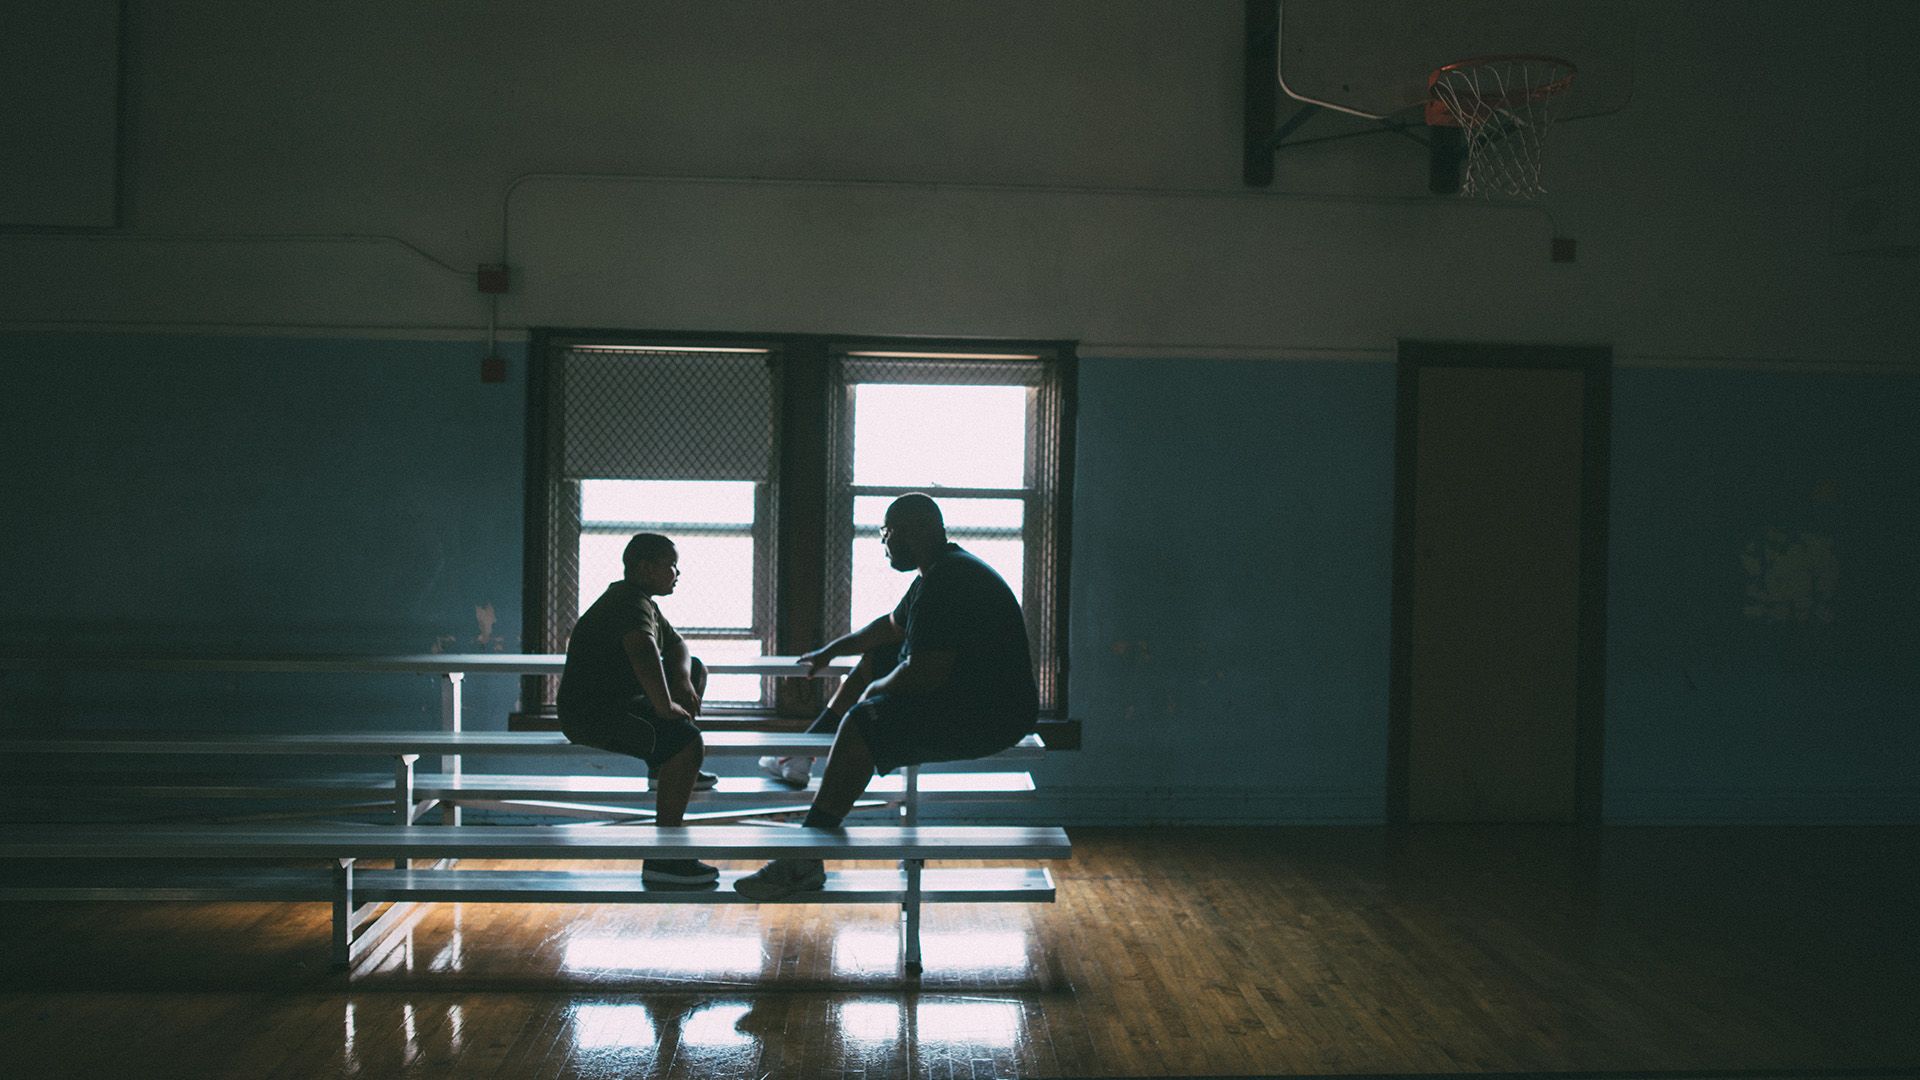 Two people having a serious discussion in a school gym.